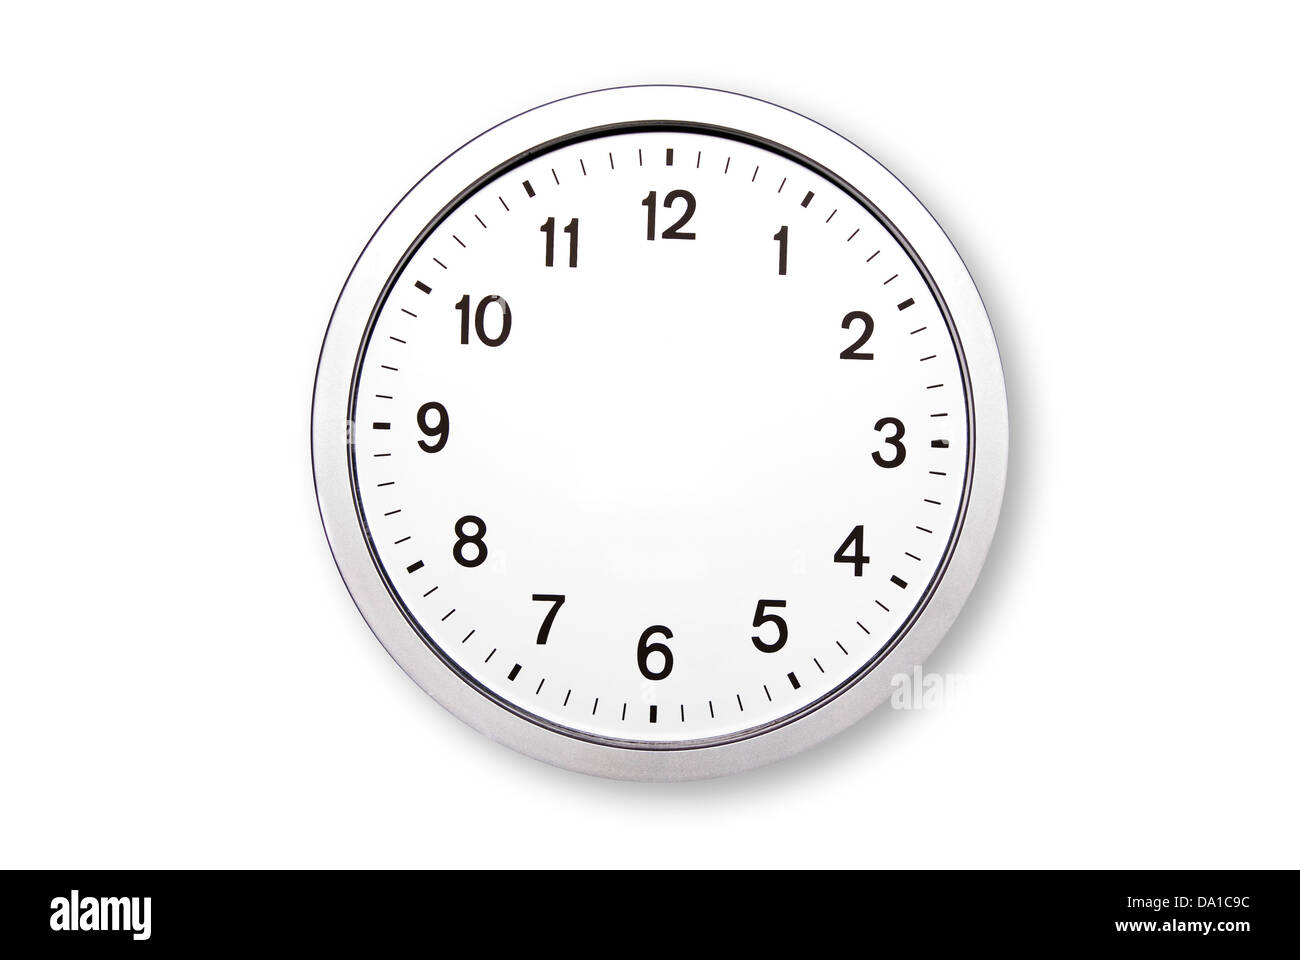 clock-without-hands-stock-photo-alamy